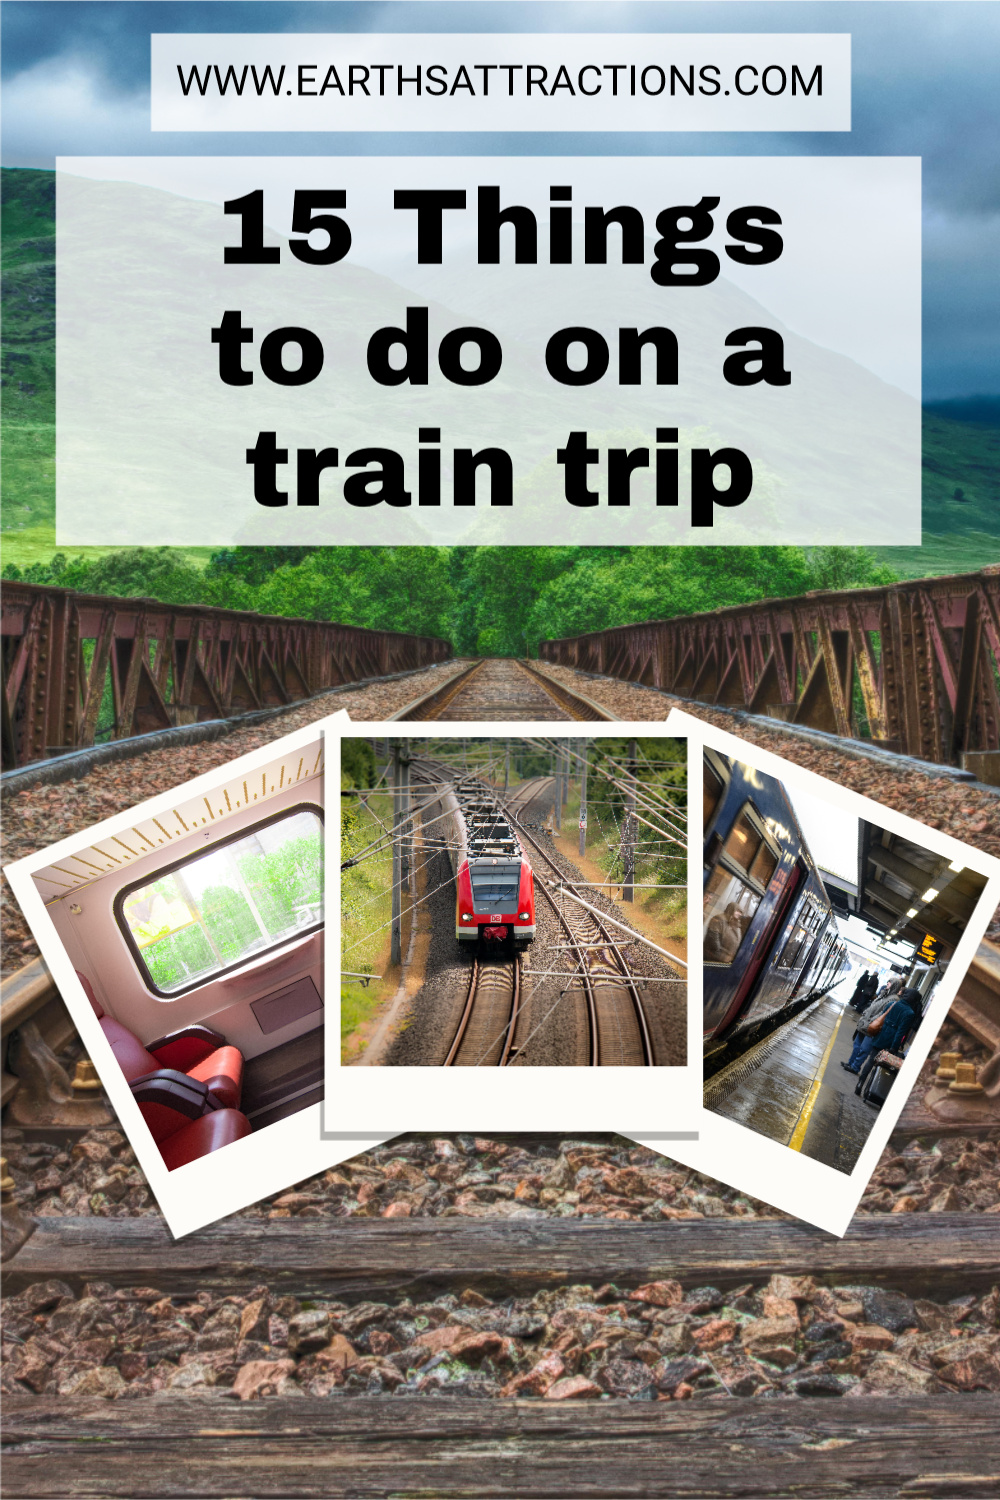 Train trip: 15 Things to do while traveling by train. Useful train travel tips! #traintravel #traintips #trainactivities #traintrip